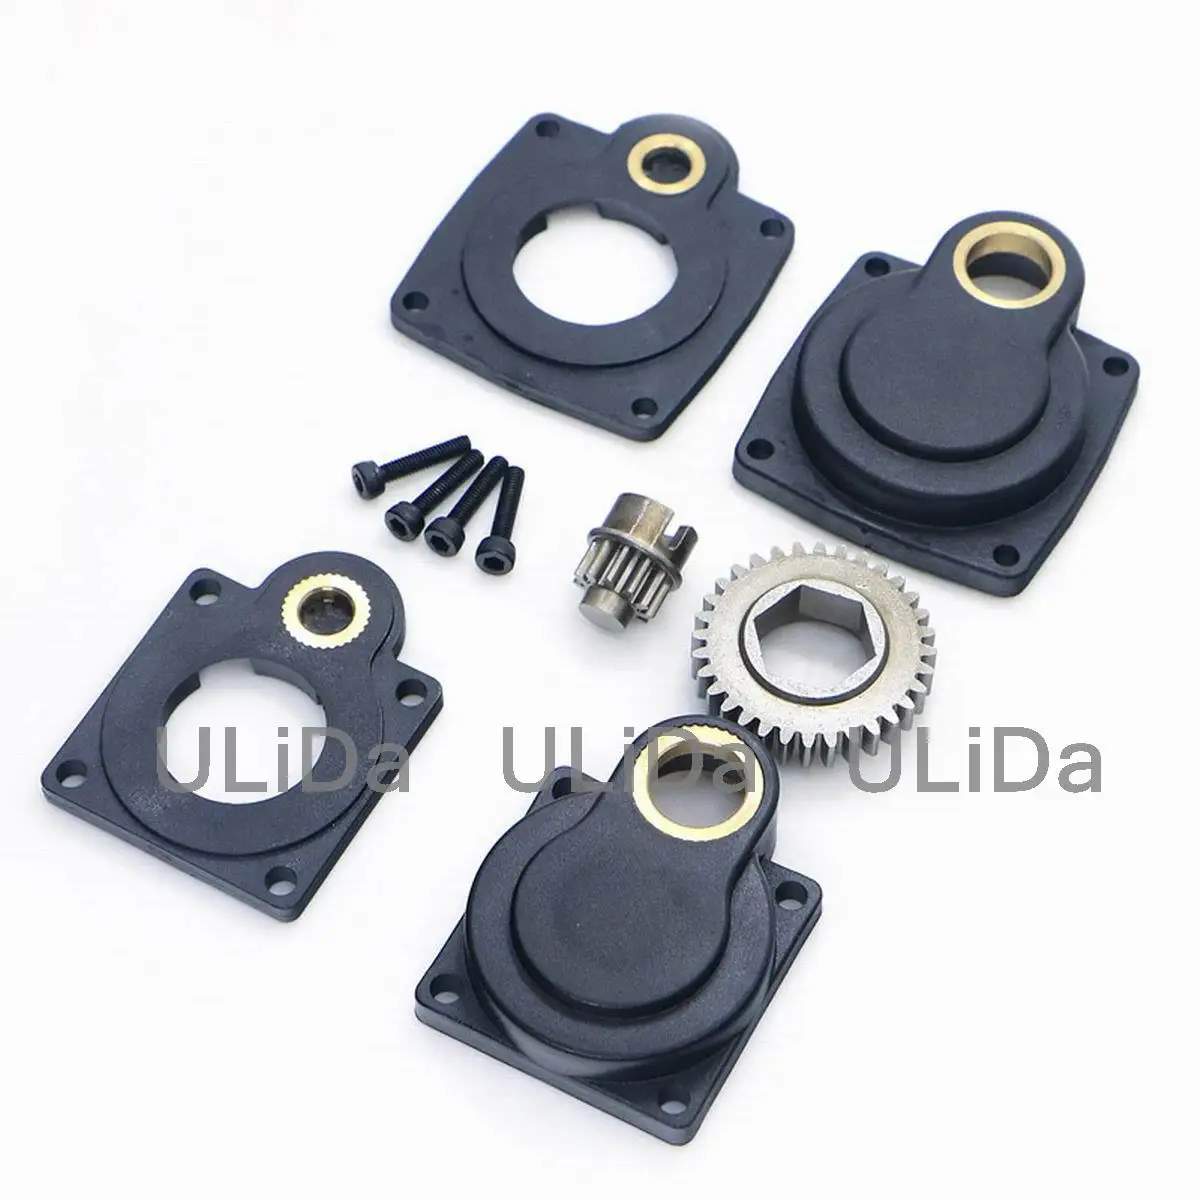 

11011 11012 Electric Power Starter Drill Plate Cover for HSP Redcat H12 VERTEX CXP SH 16 18 21 28 Engine RC Car Parts